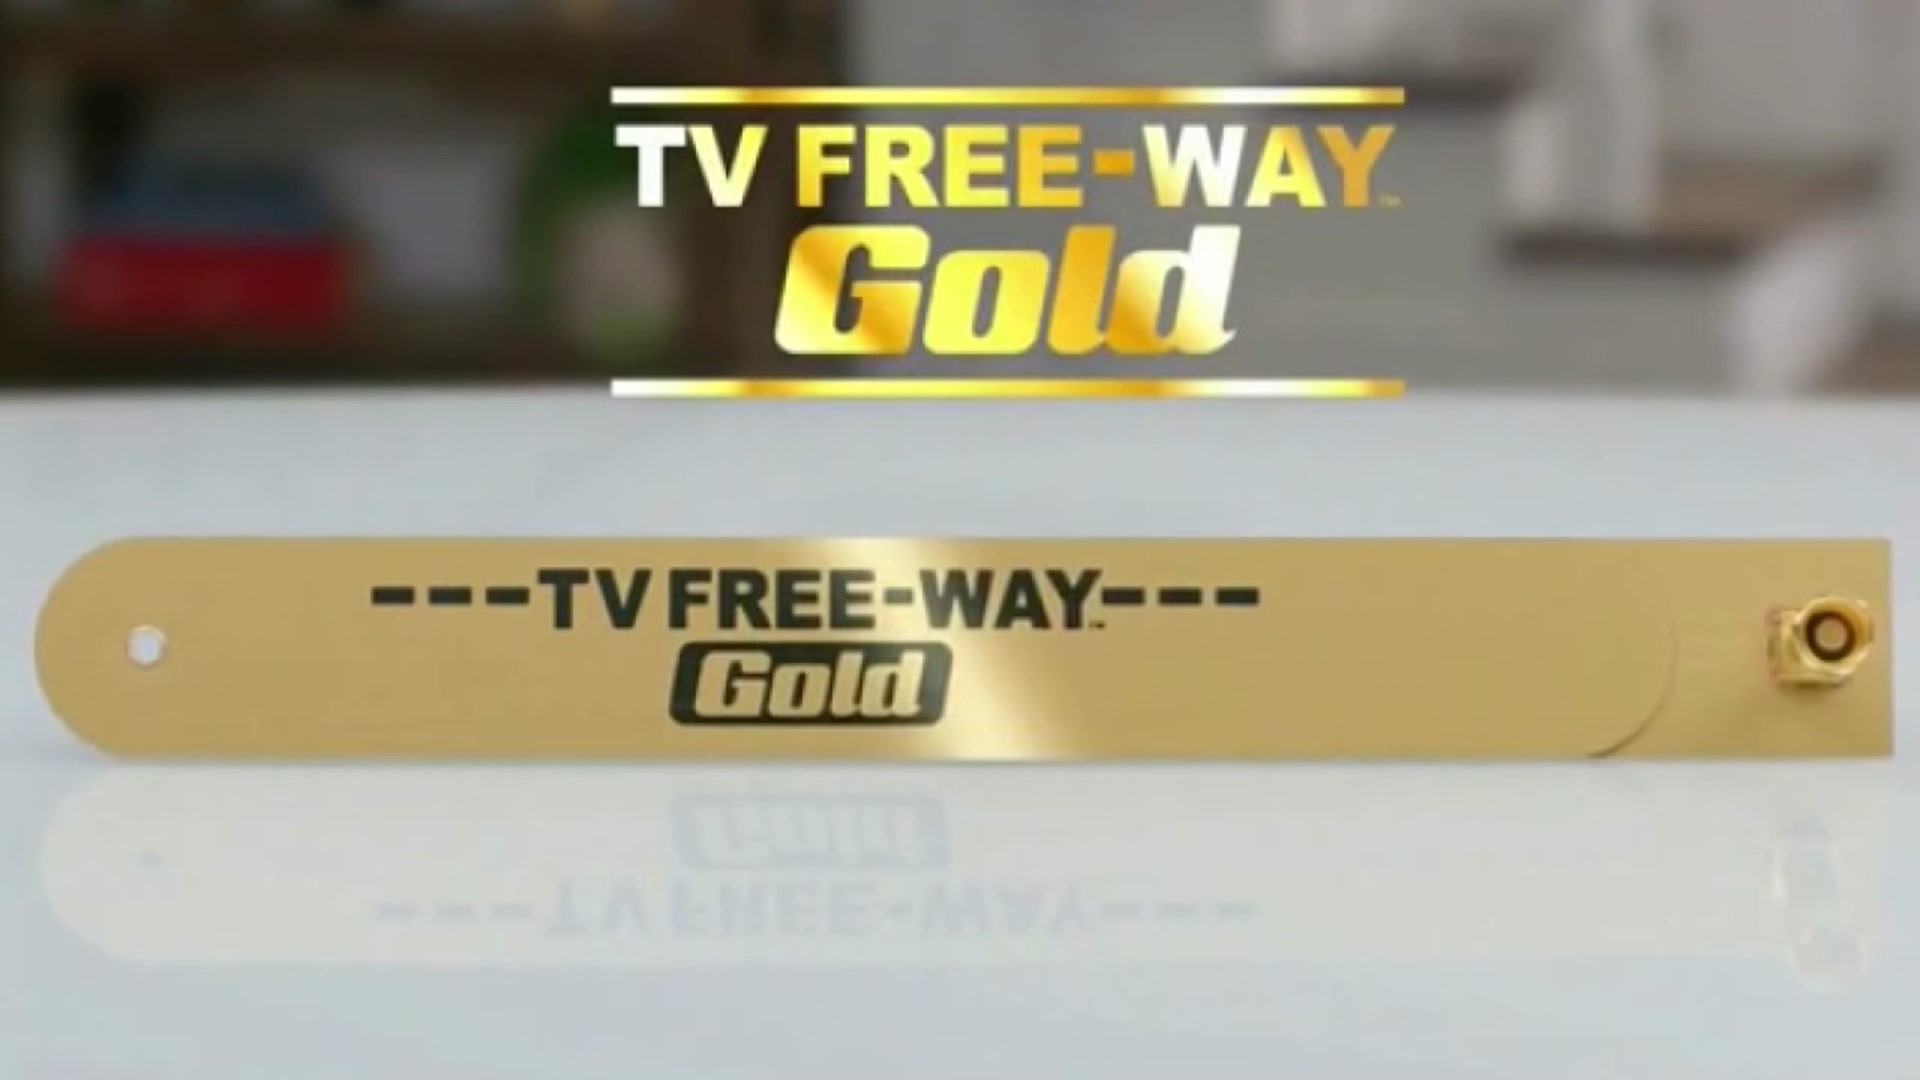 The gold-plated connectors are supposed to provide high-quality signal transfer so you can watch your favorite live sports, news stations, and sitcoms.